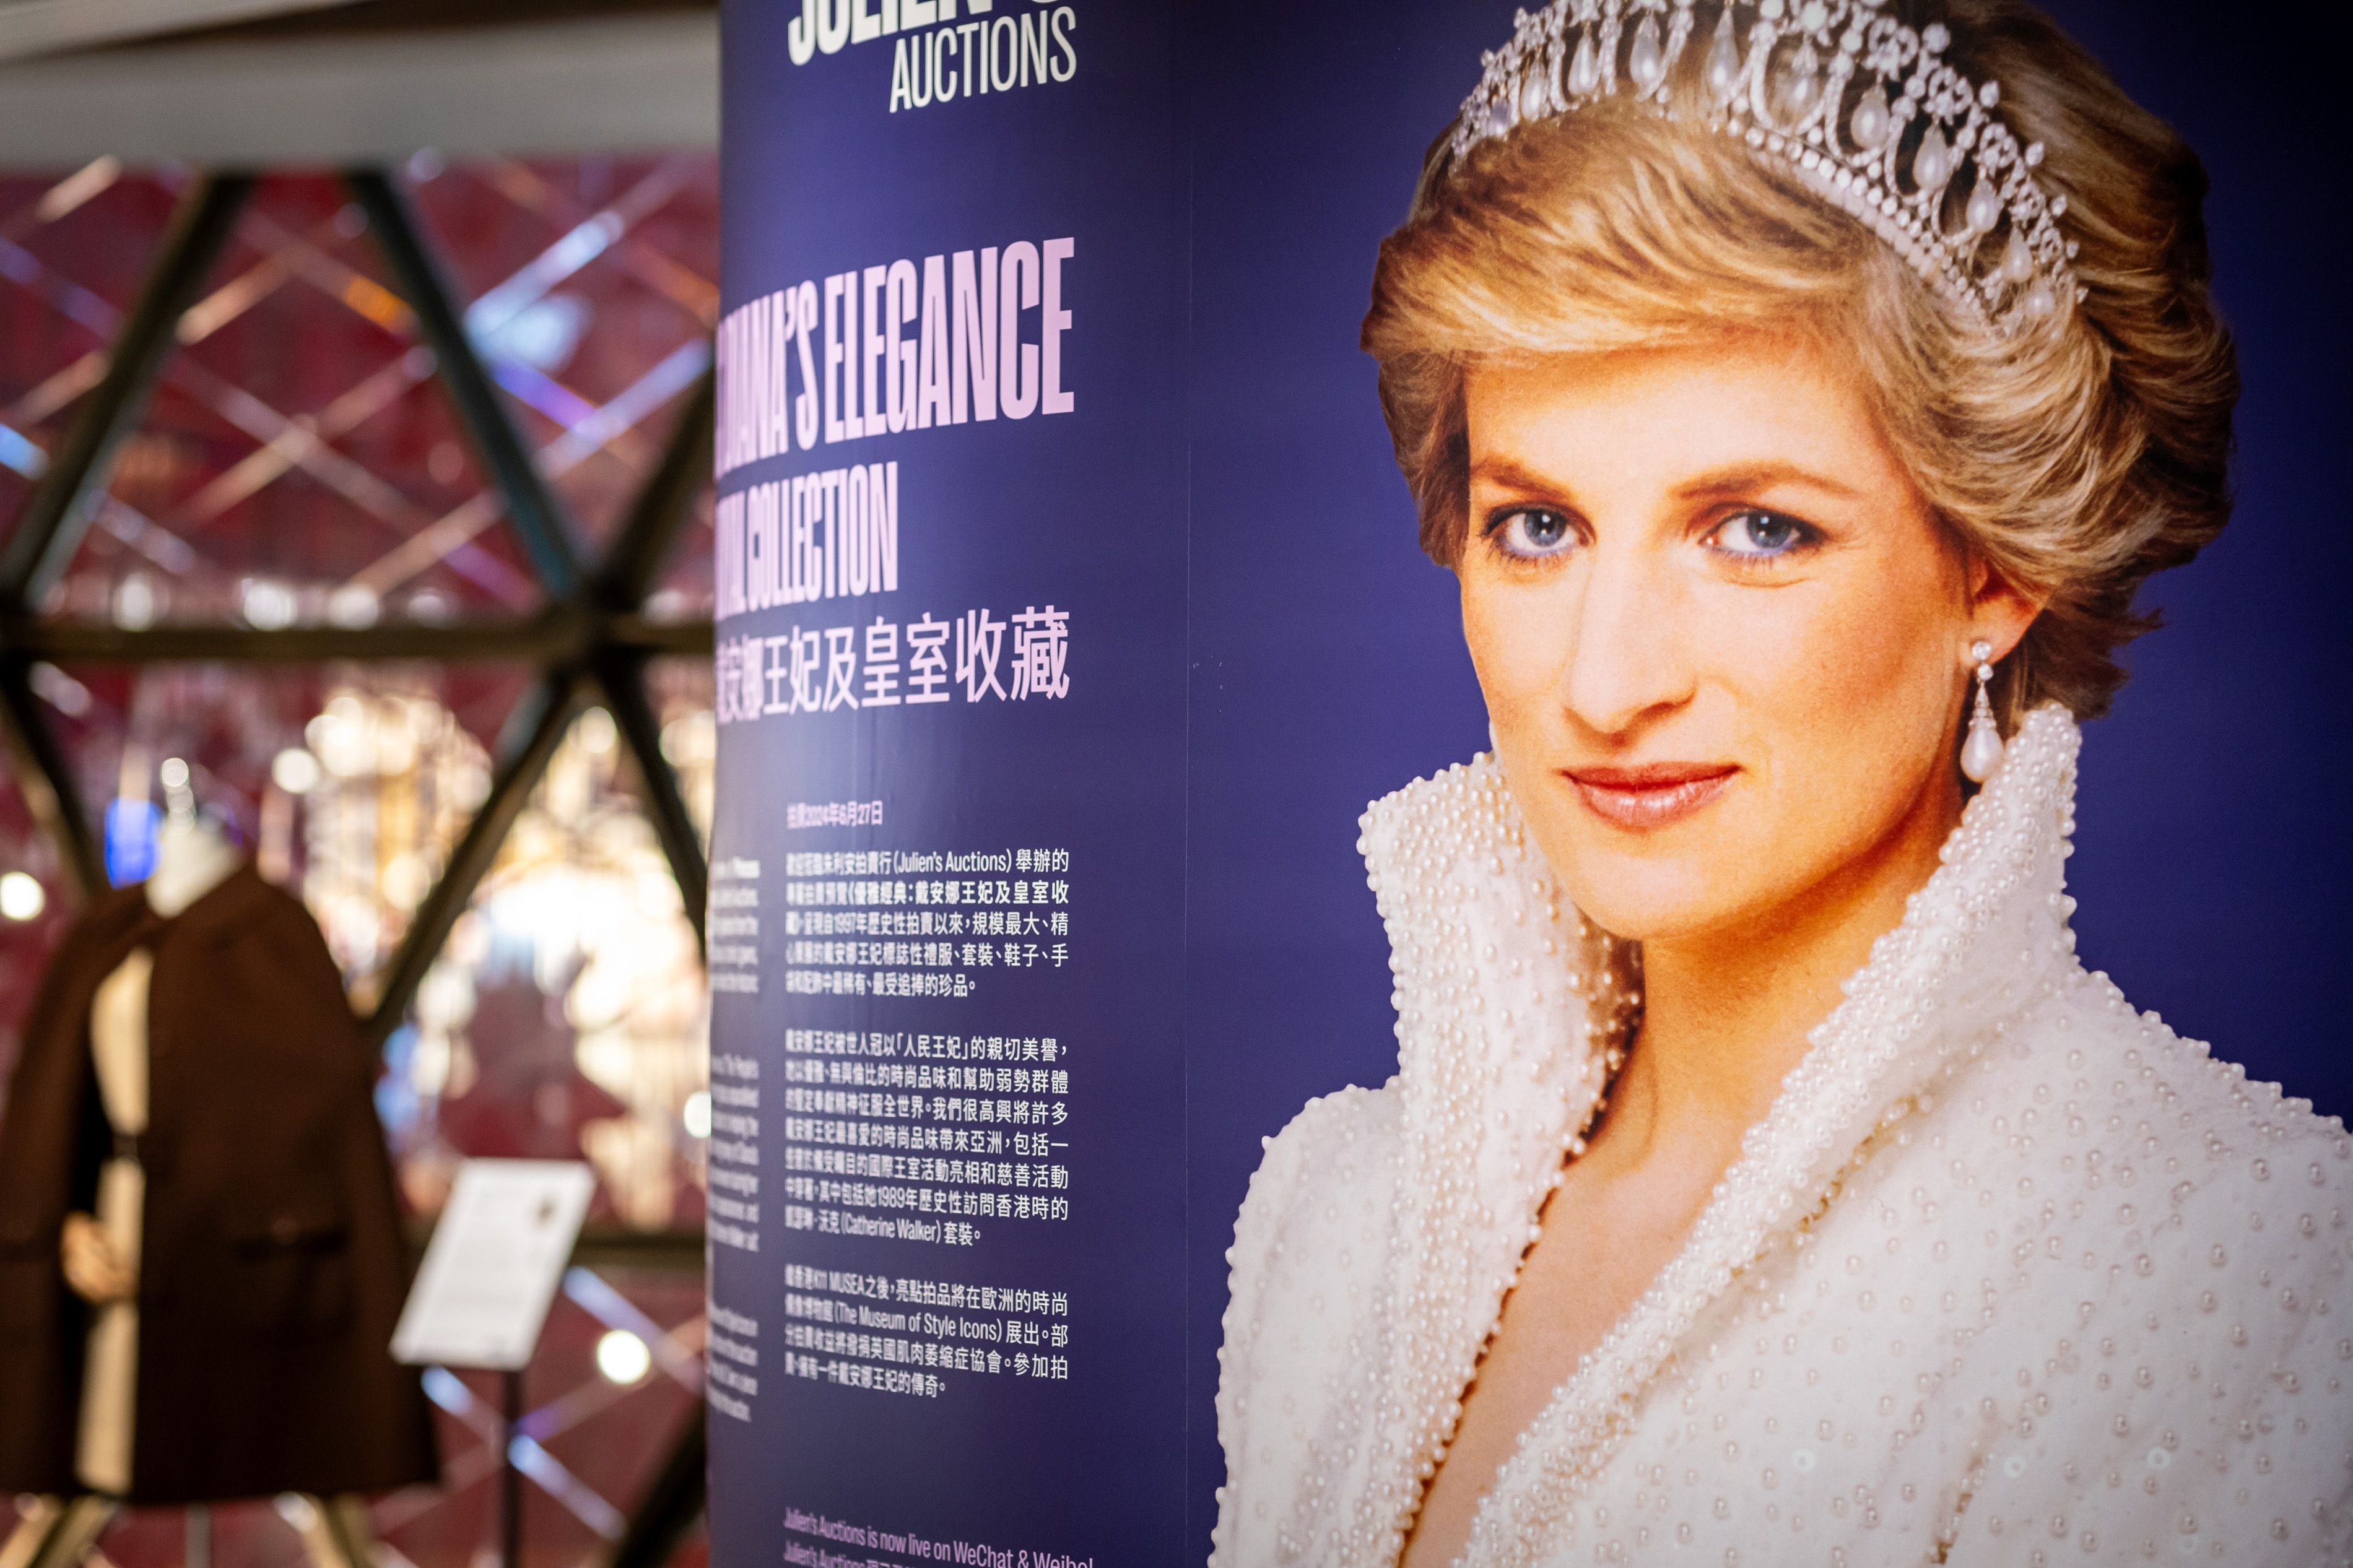 Over 9,000 Attend Exclusive Princess Diana Hong Kong Preview